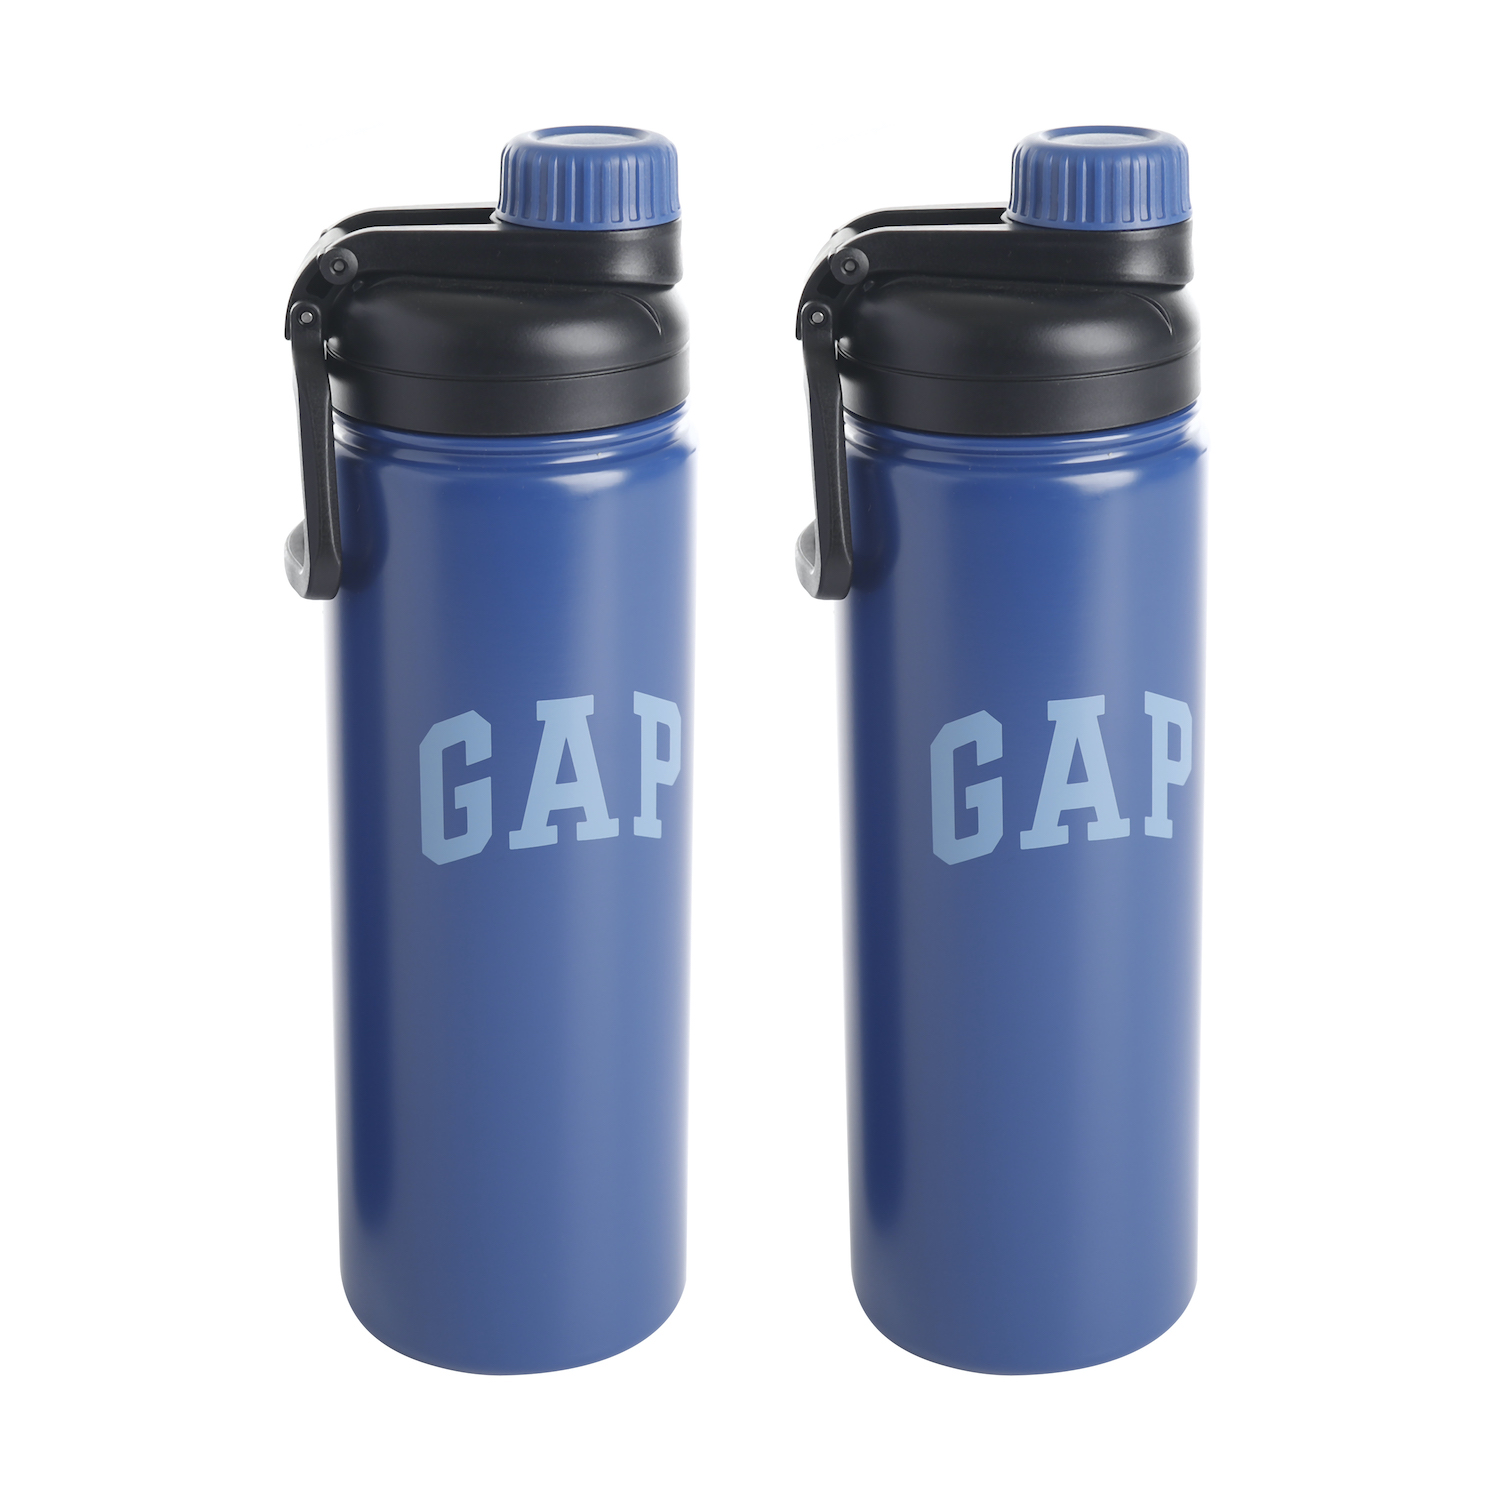 Gap Home 20-Ounce Stainless Steel Blue Hydration Bottle, Set of 2